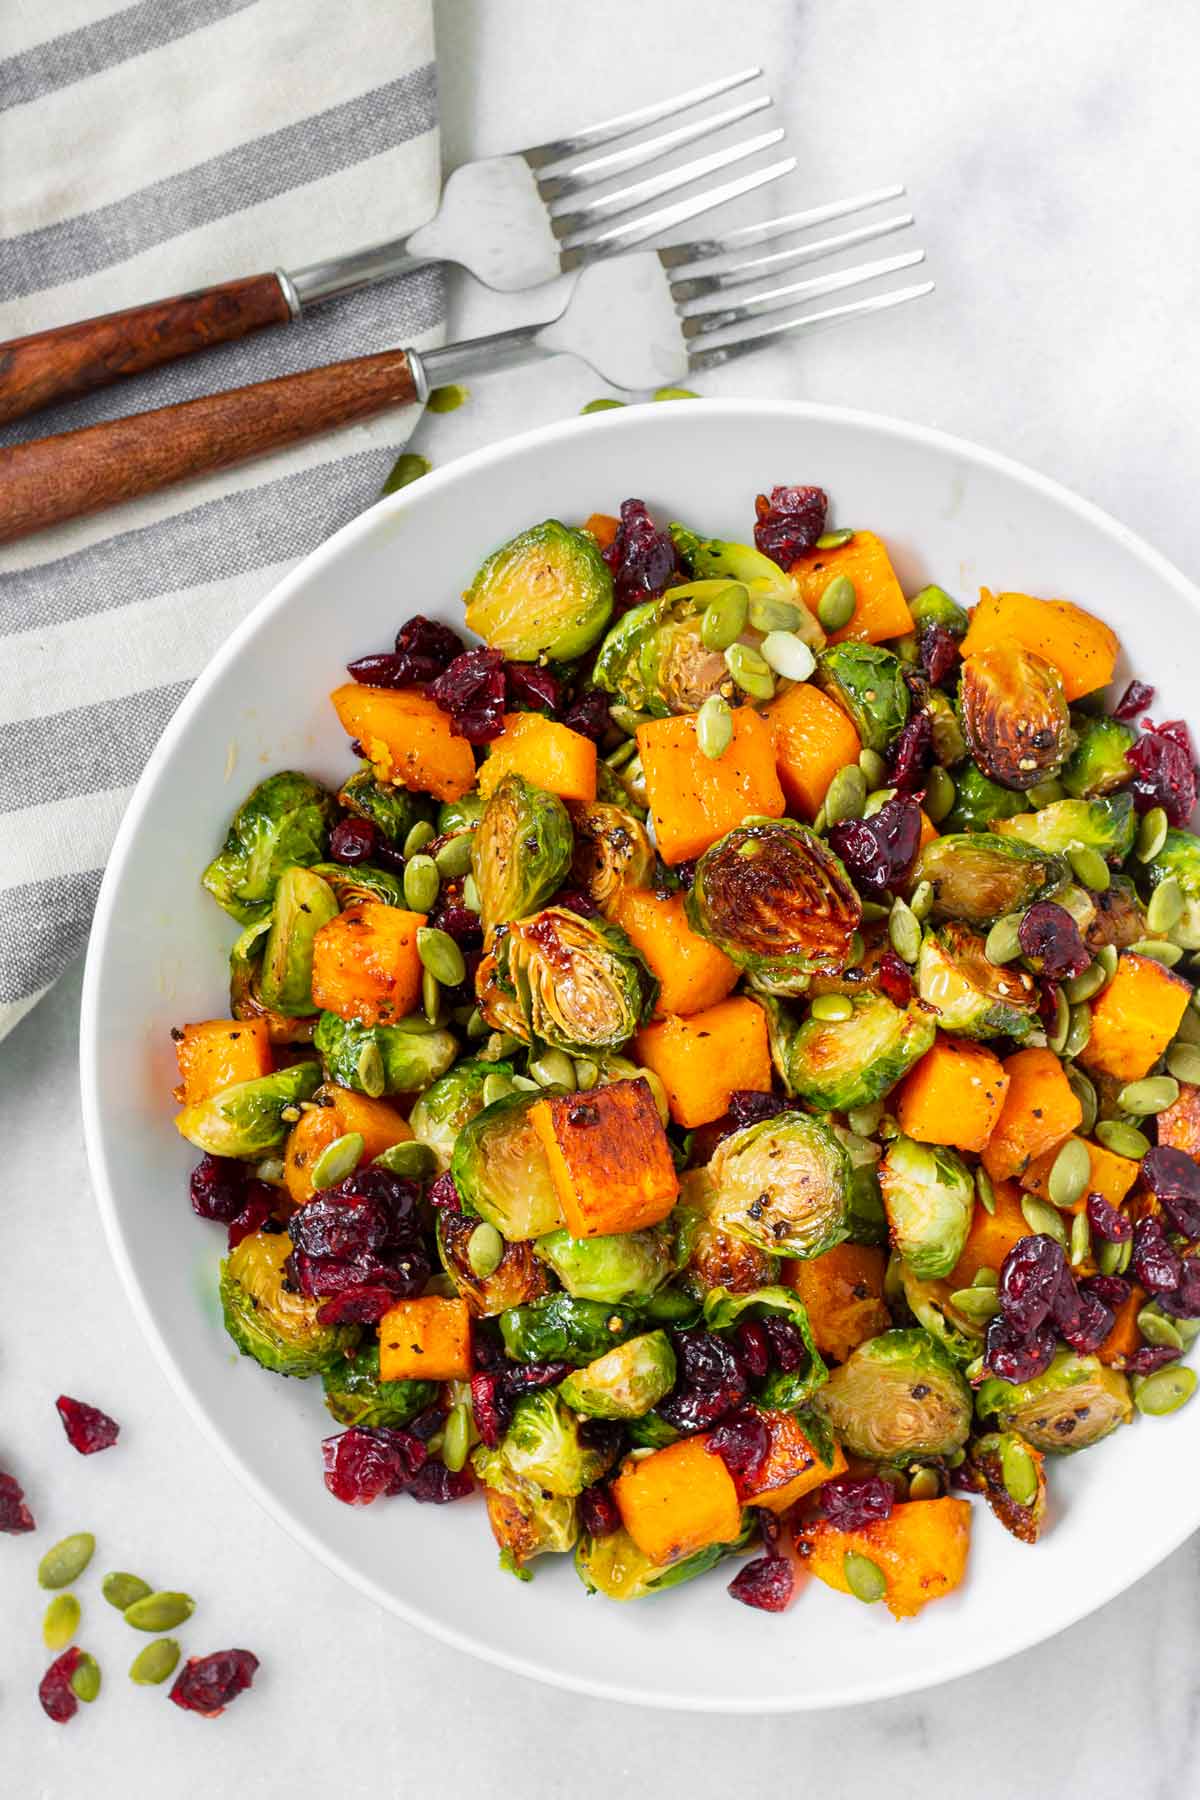 bowl of roasted squash and brussel sprouts next to forks and napkin